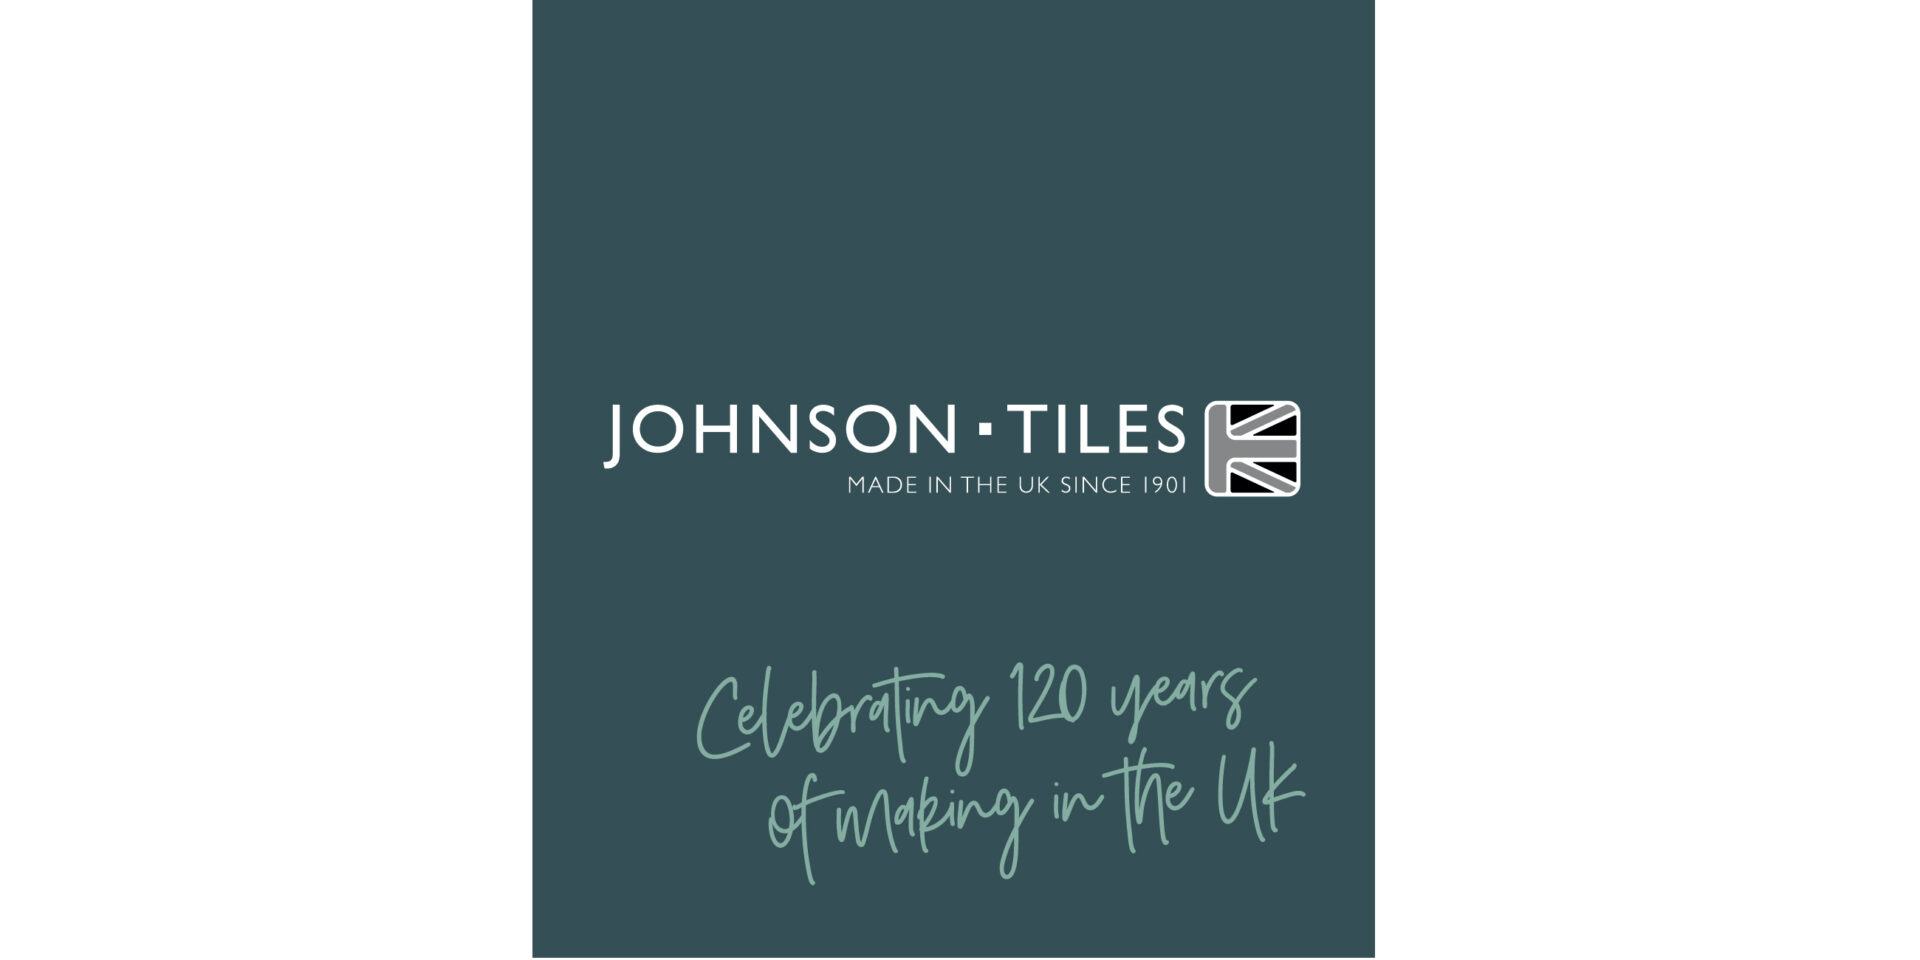 Debbie Tams - P.a. And Front Of House at Johnson Tiles | The Org